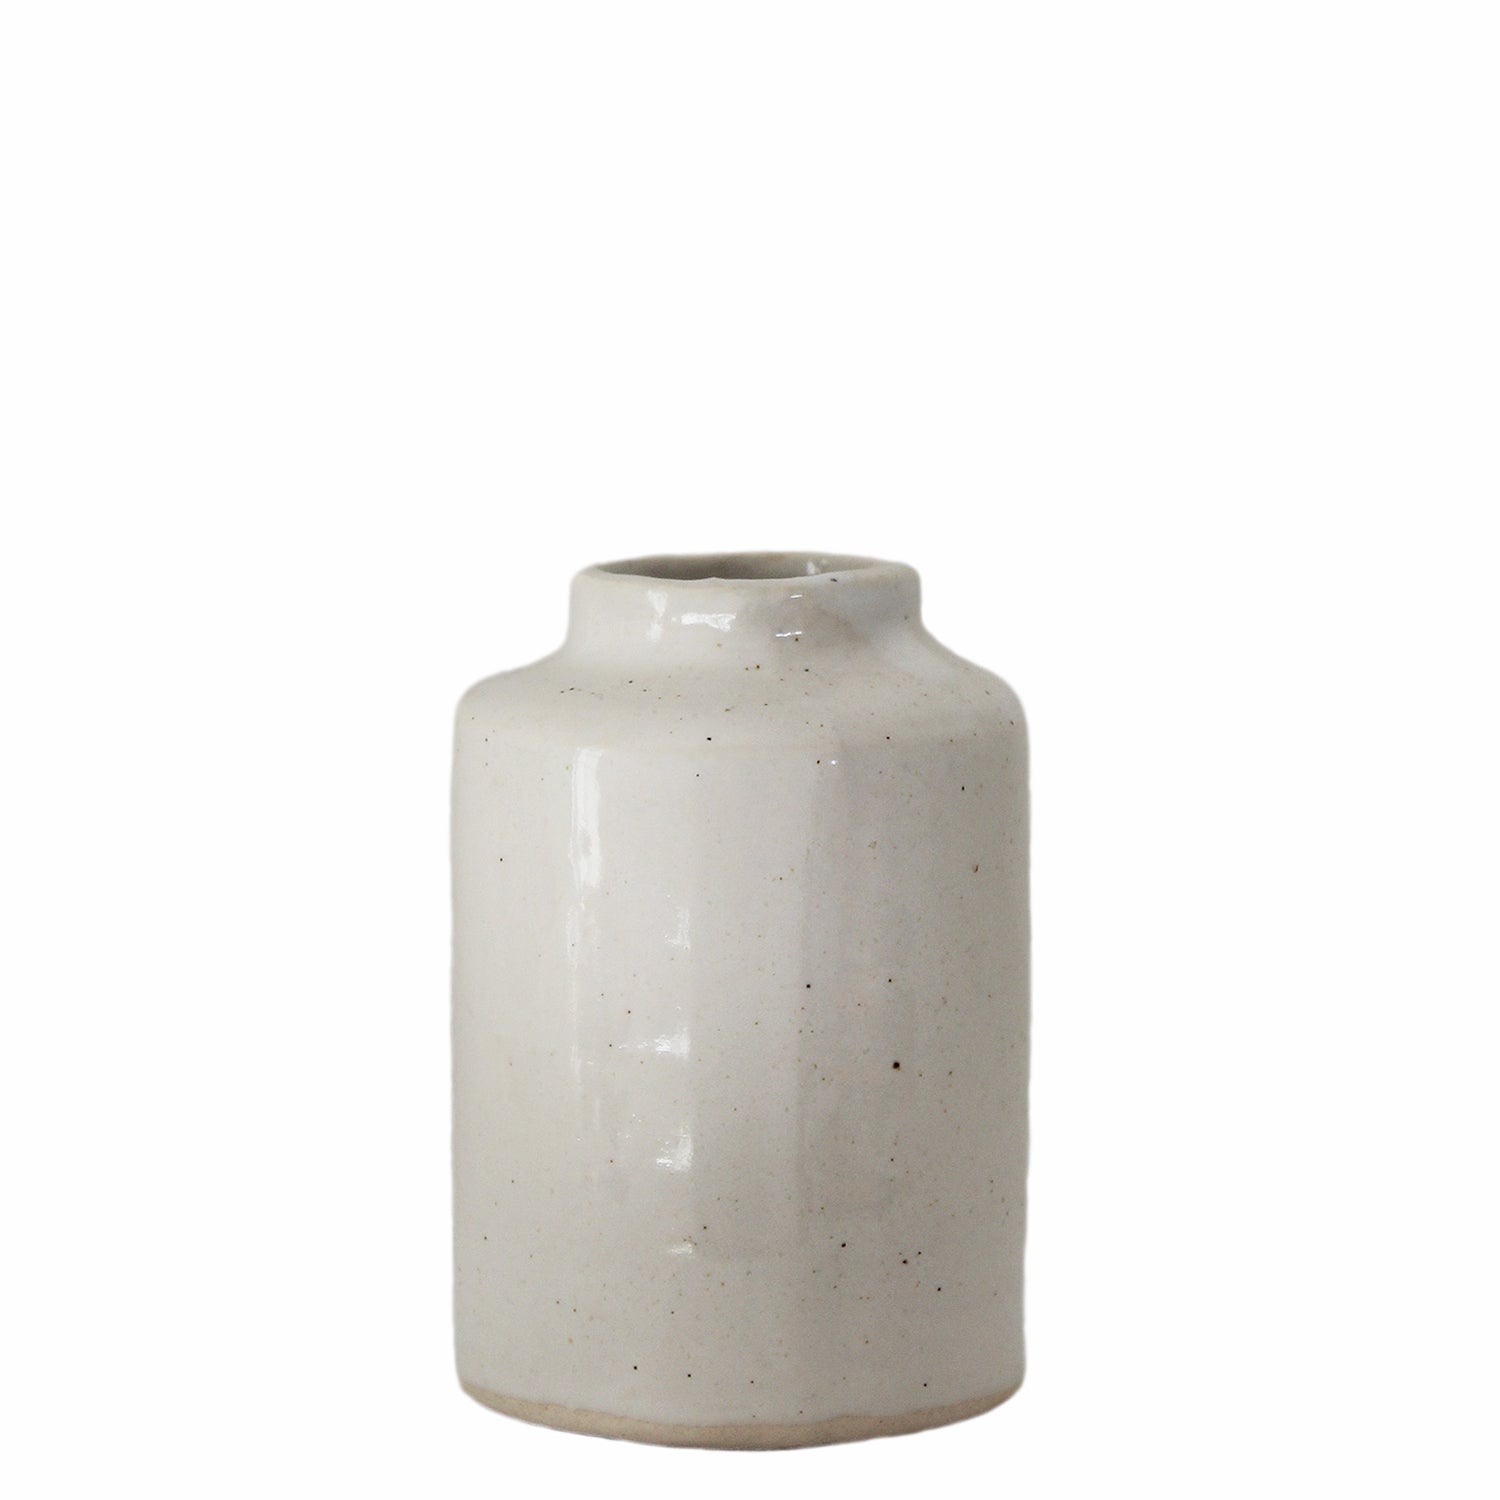 Ceramic Handmade Tall Reed Diffuser Pot White Speckle